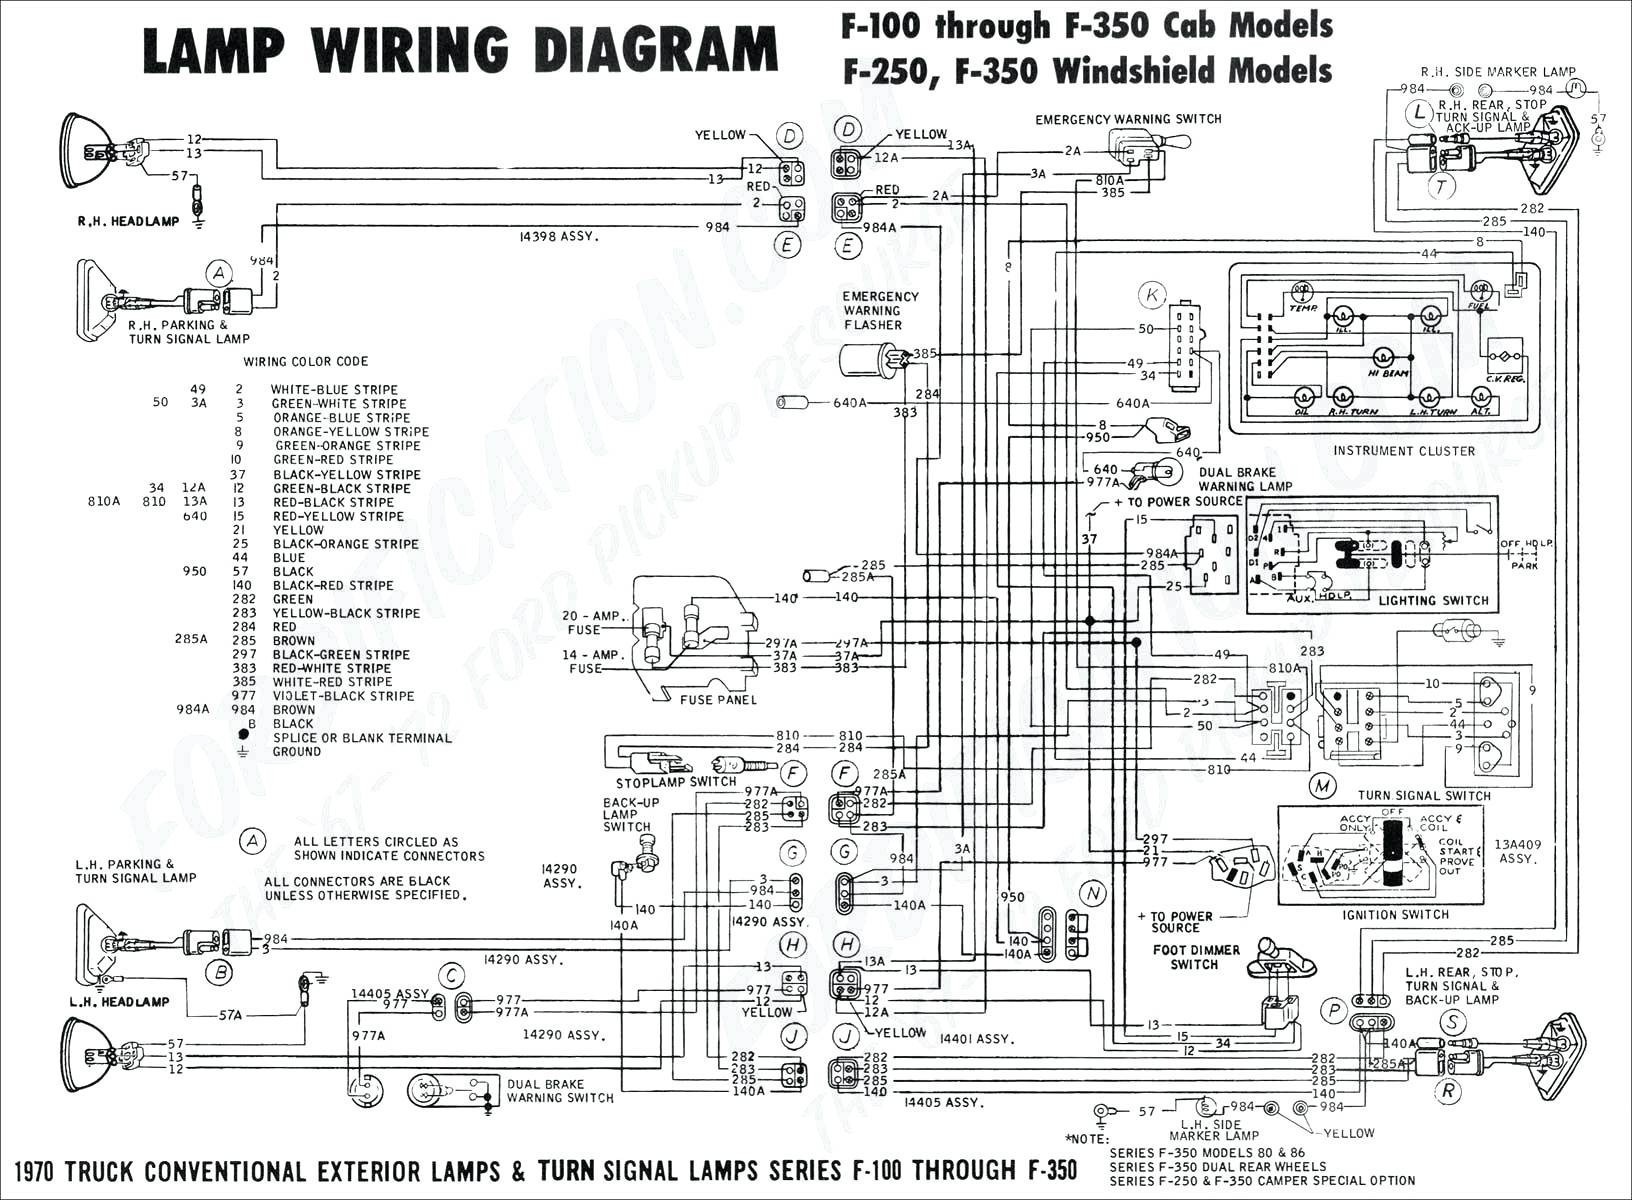 2003 Mazda Tribute Engine Diagram 2001 Mazda 626 Wiring Diagram Download Simple Guide About Wiring Of 2003 Mazda Tribute Engine Diagram